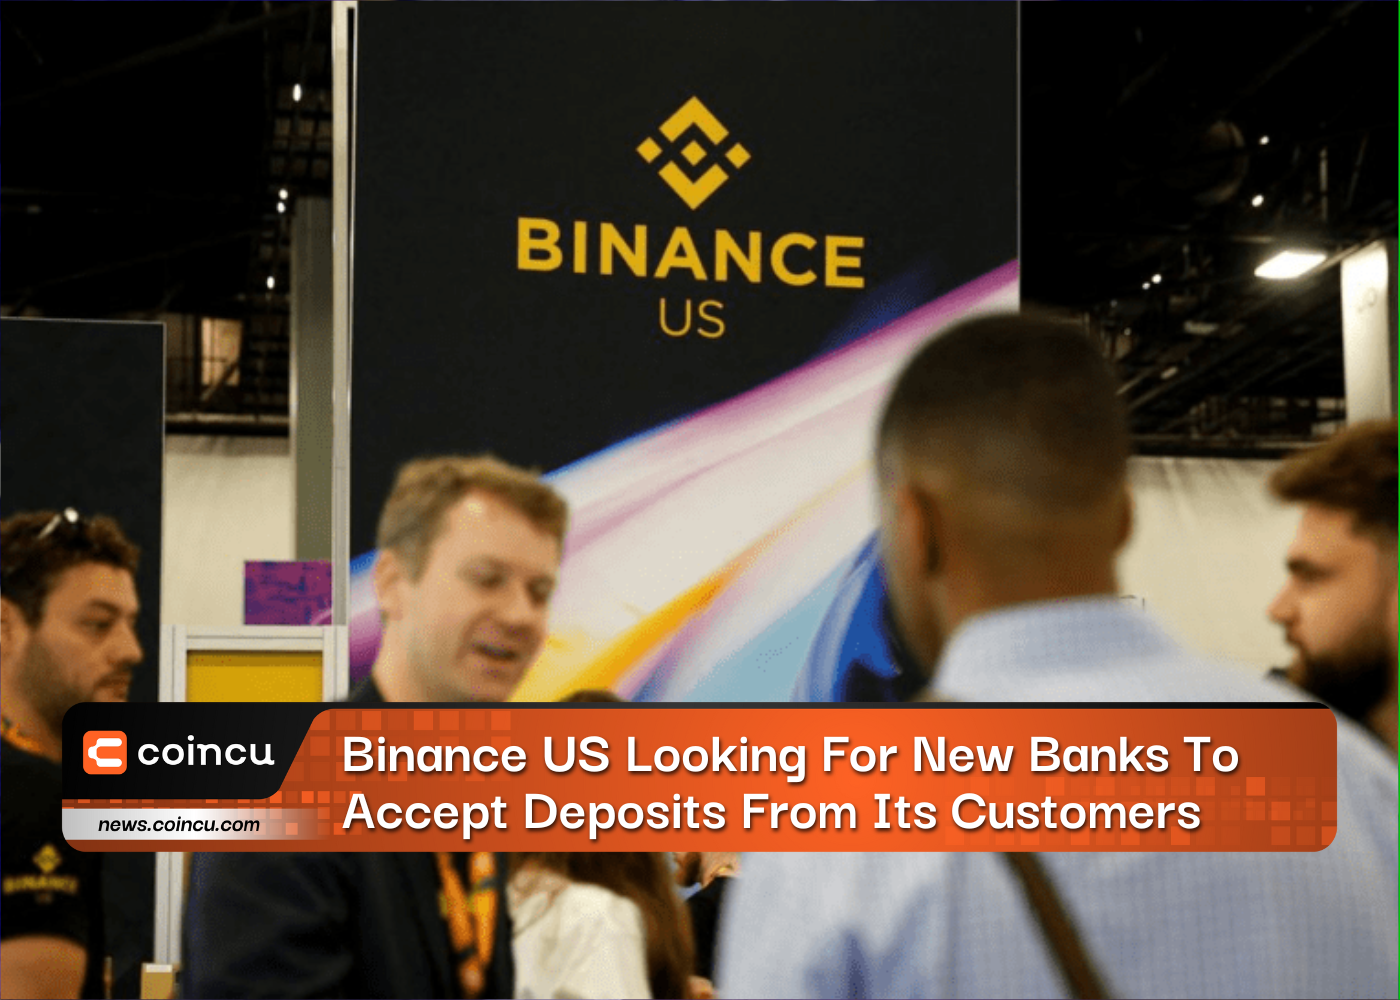 Binance US Looking For New Banks To Accept Deposits From Its Customers